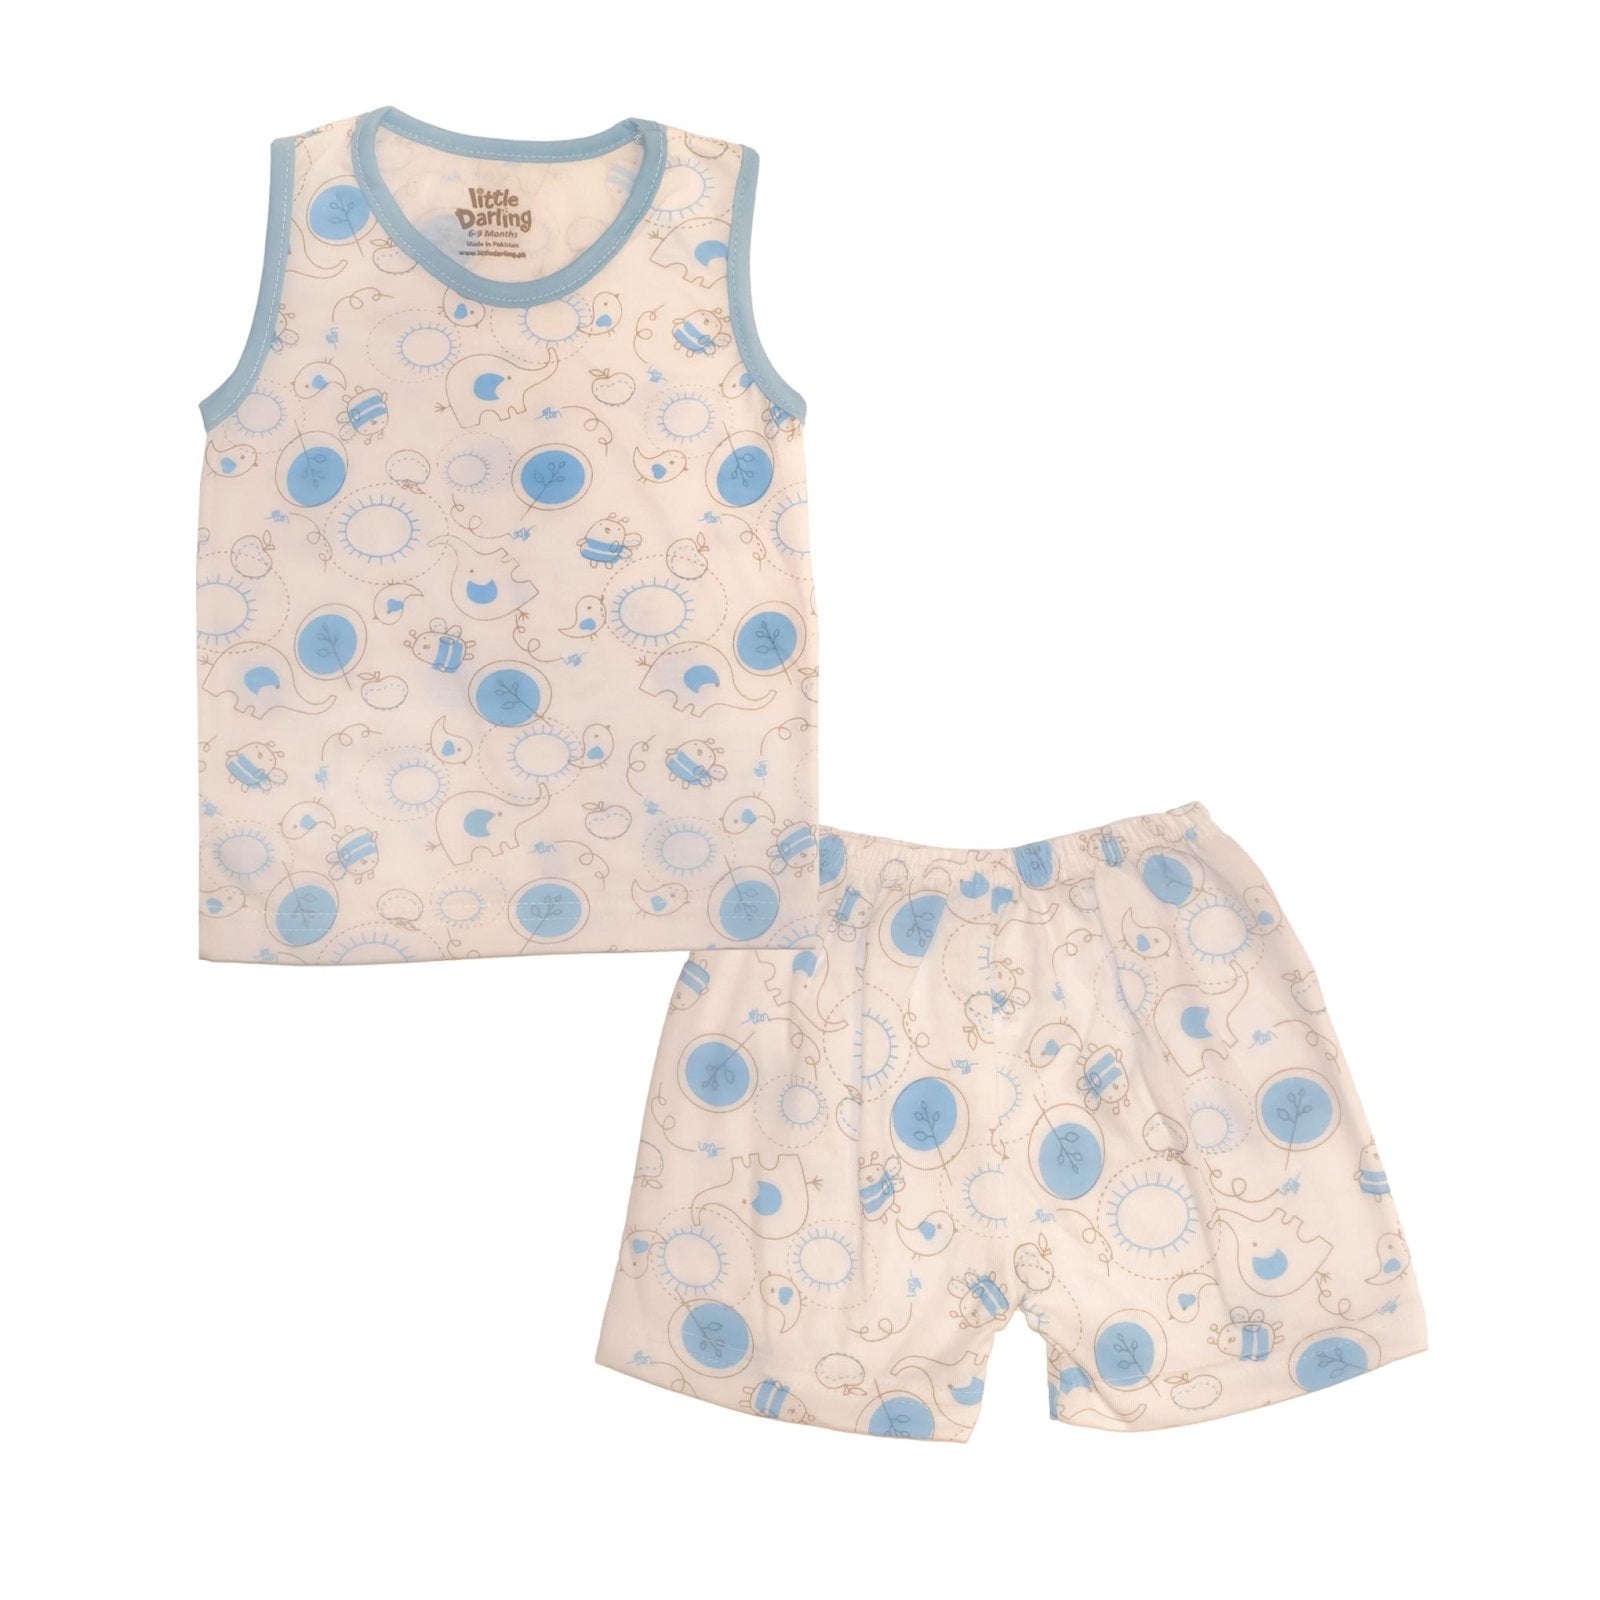 Sando Suit Blue Elephant And Birds Print by Little Darling